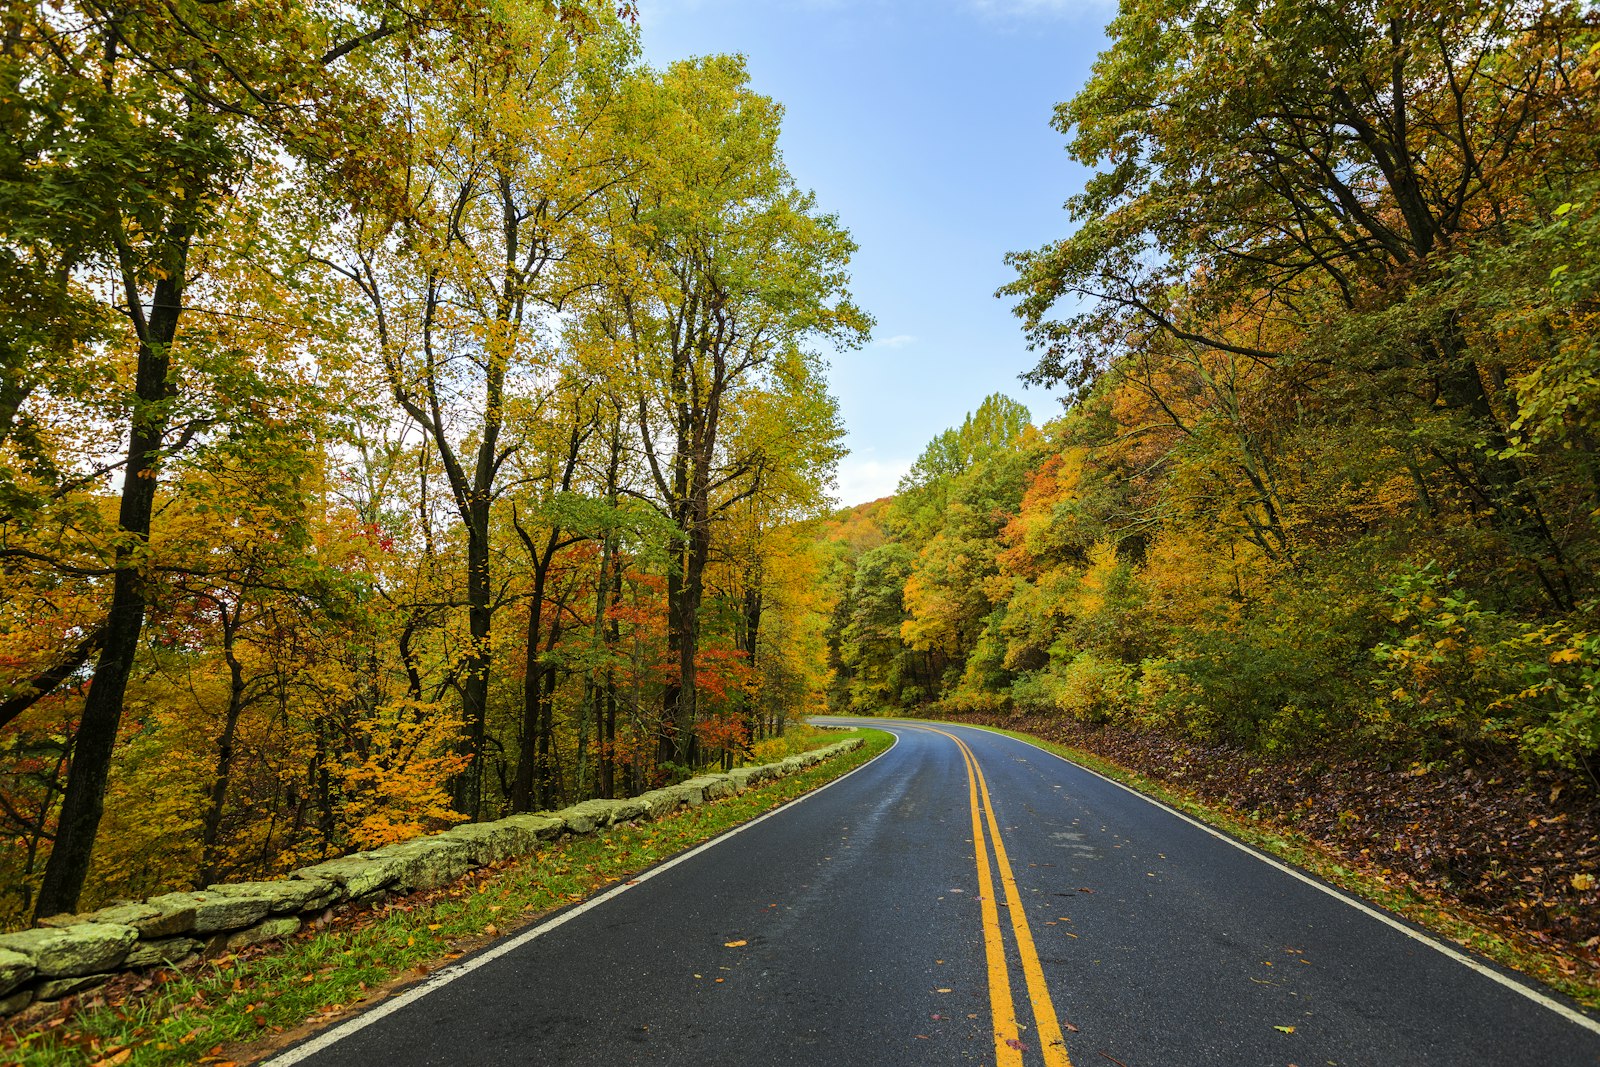 A paved road is lined by autumnal leaves